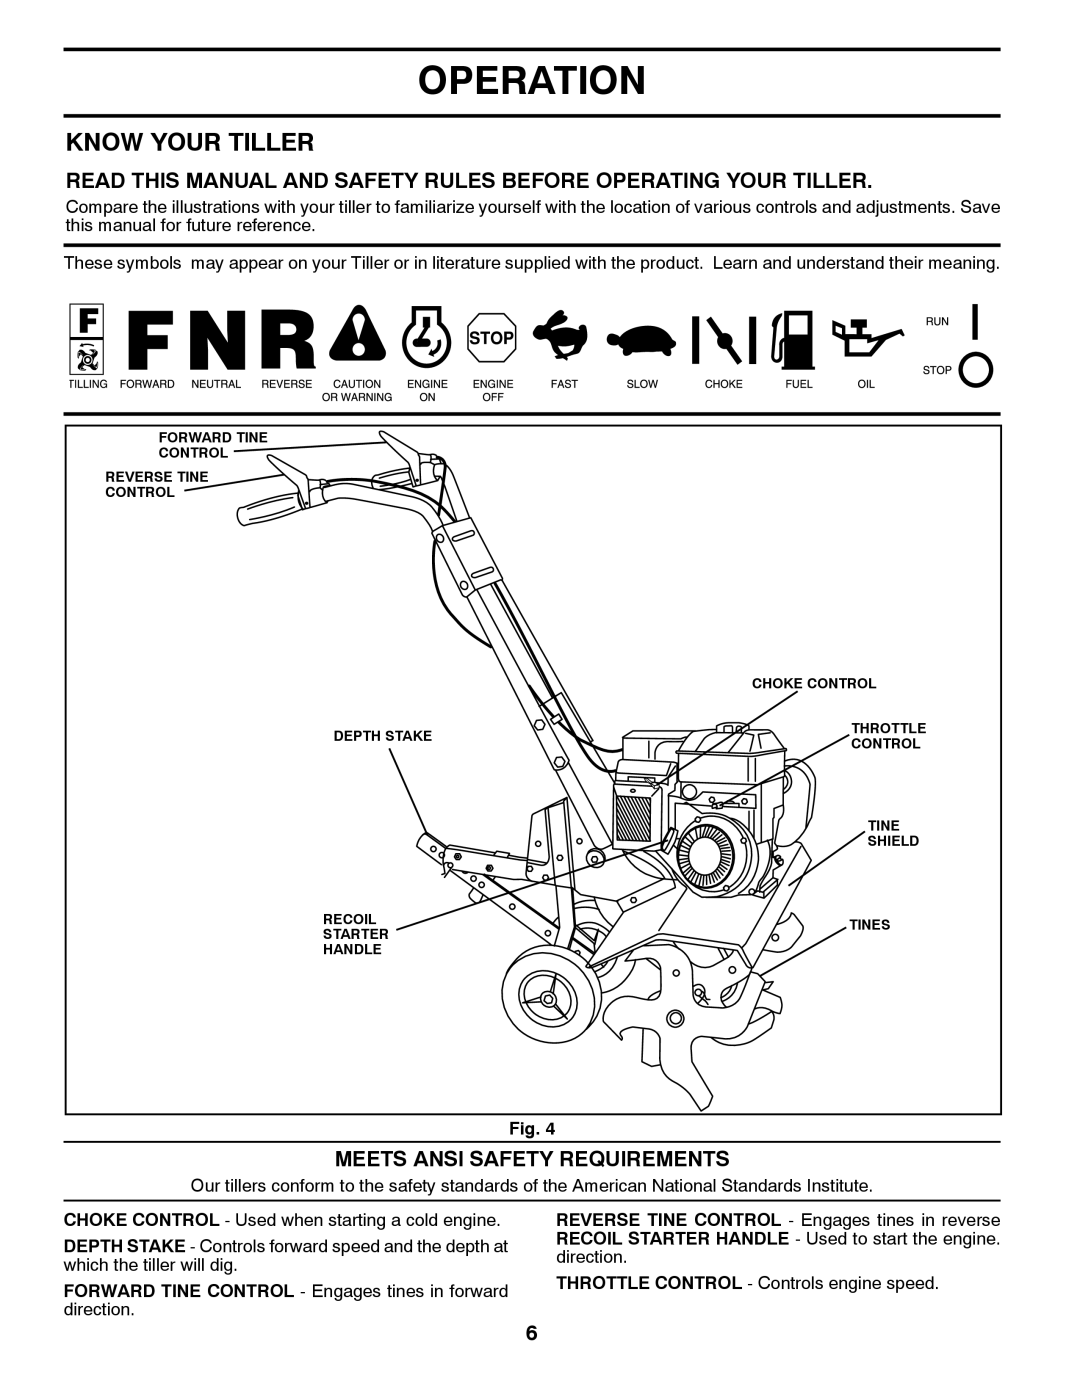 Husqvarna FT900 owner manual Operation, Know Your Tiller, Meets Ansi Safety Requirements, Fig 